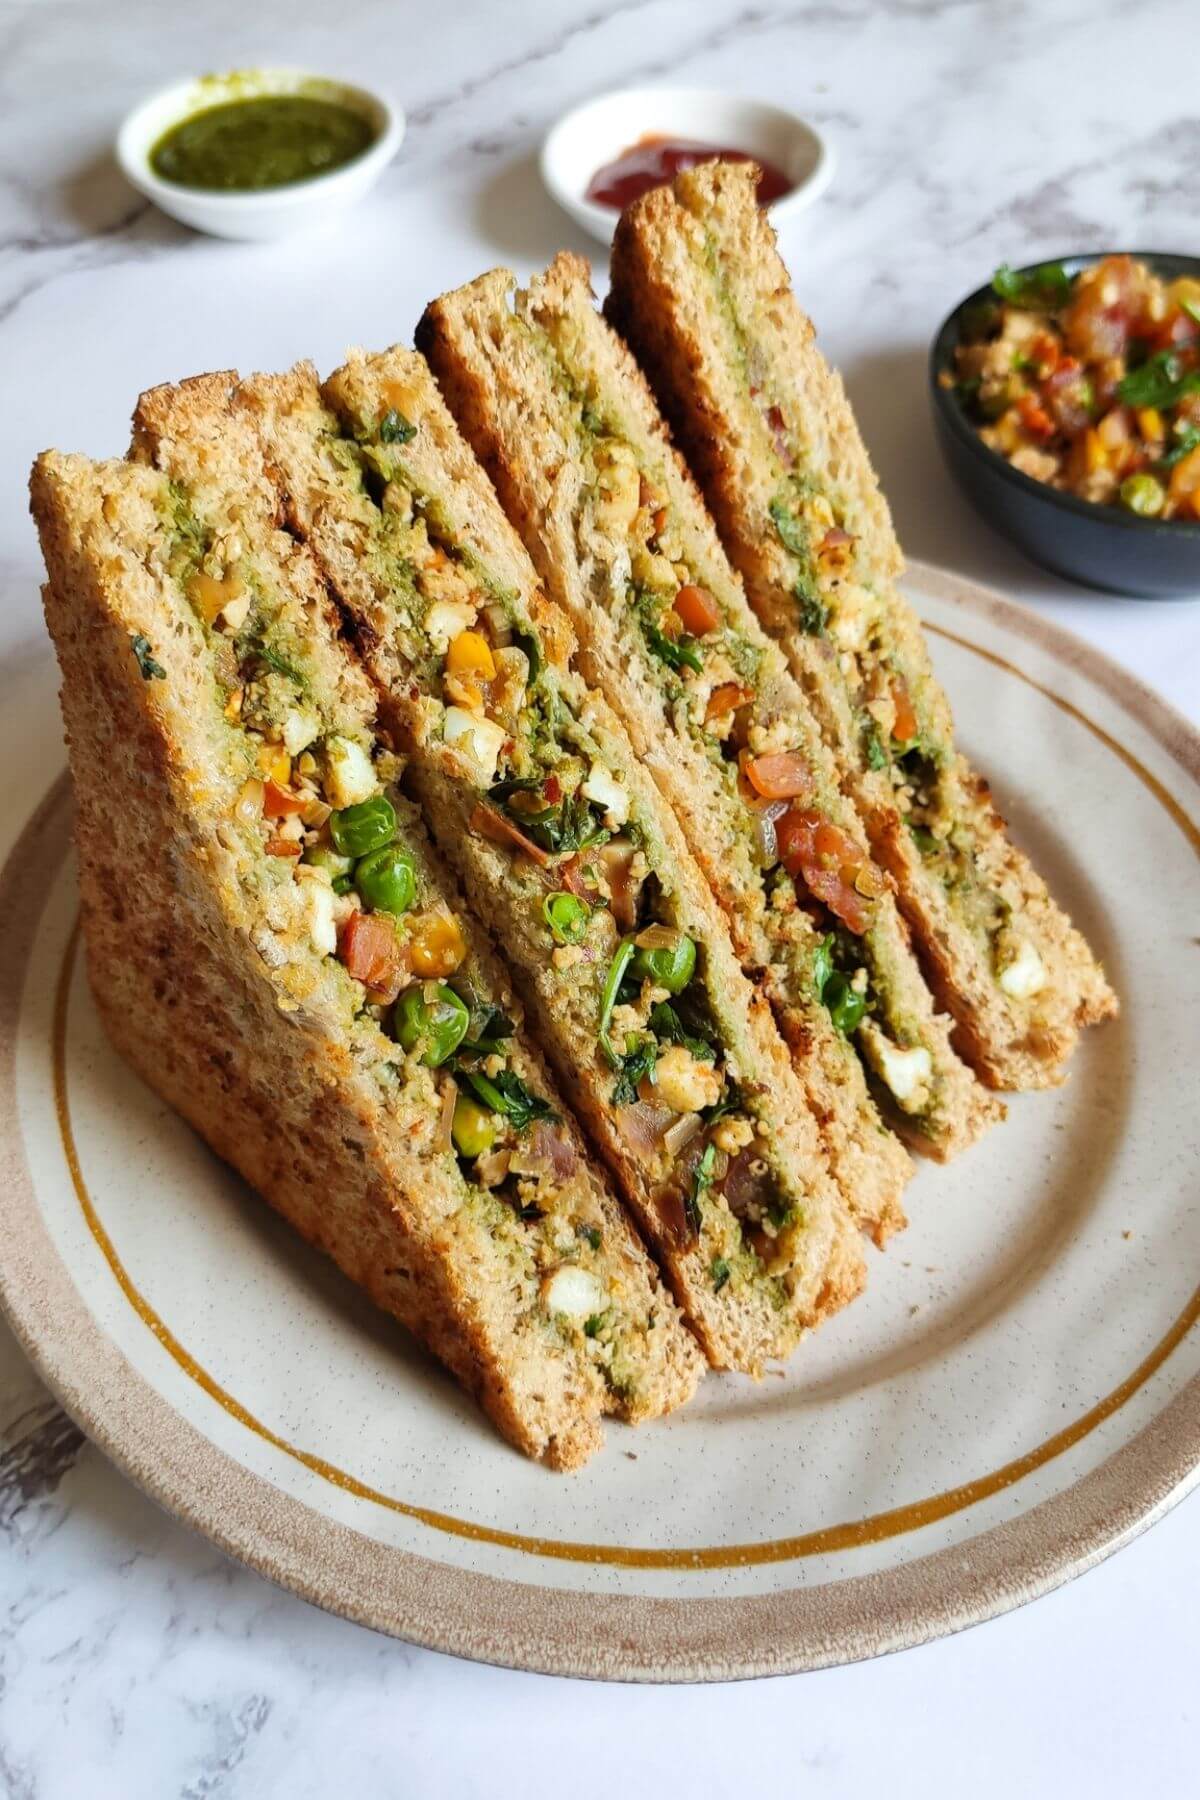 Four spicy paneer sandwiches on a plate with bowls of dipping sauce.